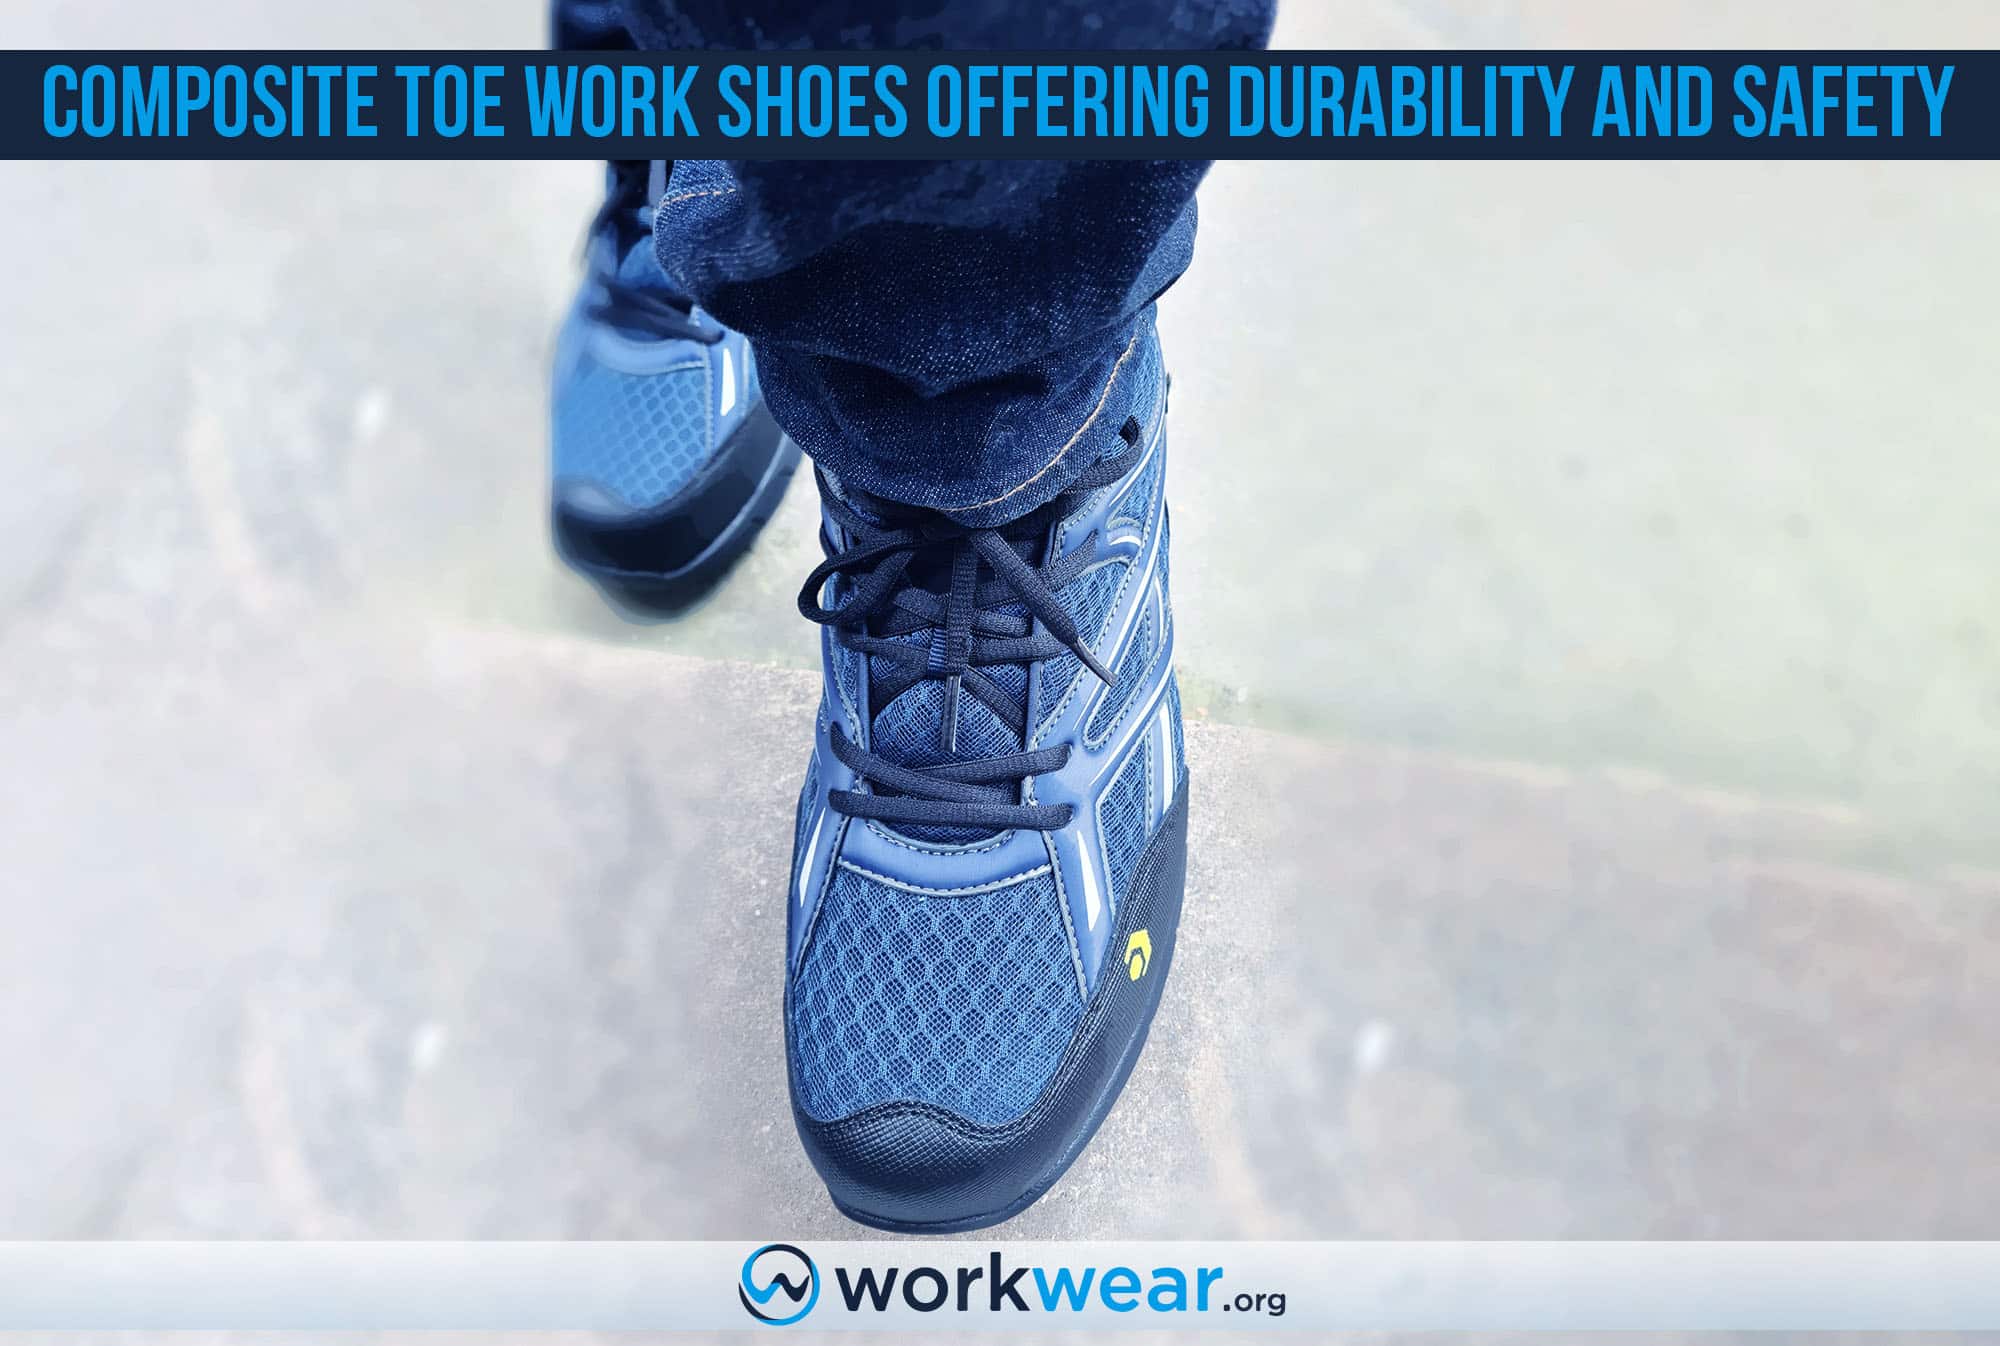 Composite toe work shoes offering durability and safety